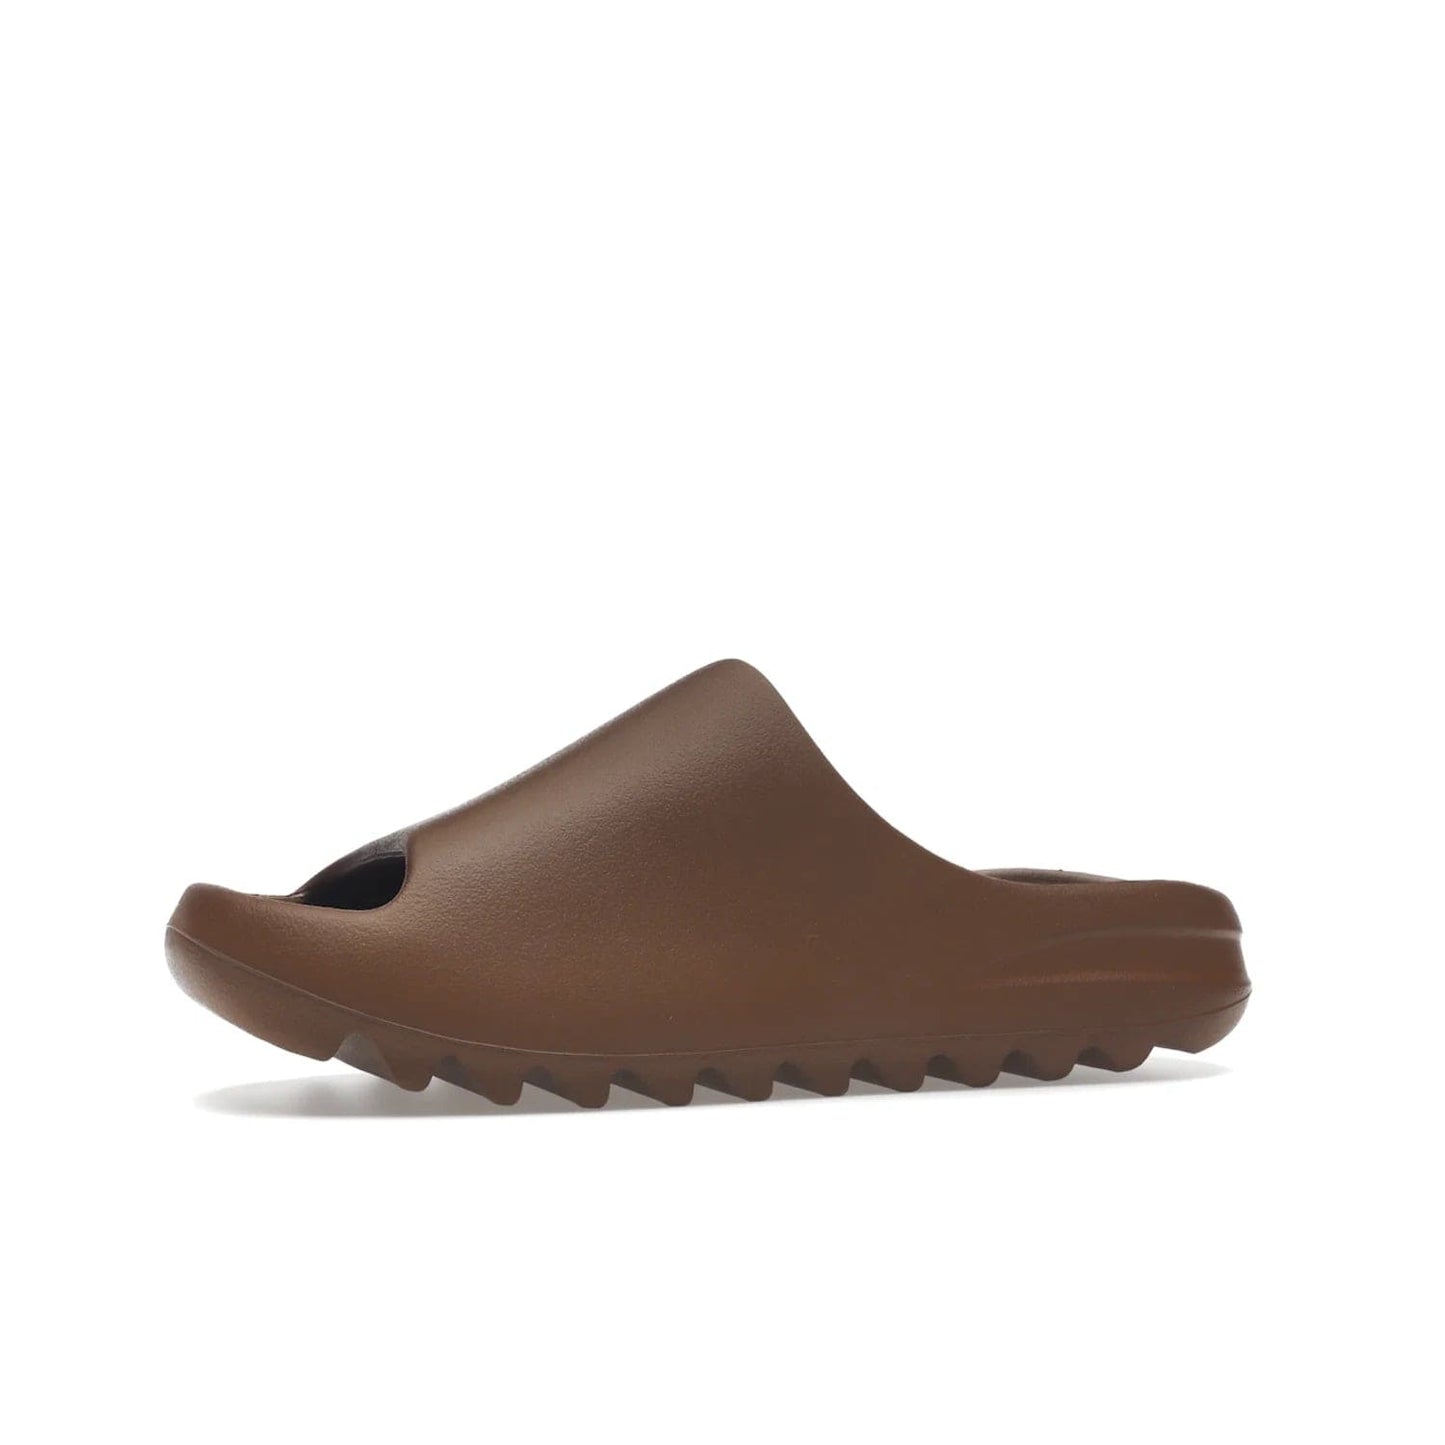 adidas Yeezy Slide Flax - Image 17 - Only at www.BallersClubKickz.com - Score the perfect casual look with the adidas Yeezy Slide Flax. Made with lightweight injected EVA plus horizontal grooves underfoot for traction. Release on August 22, 2022. $70.